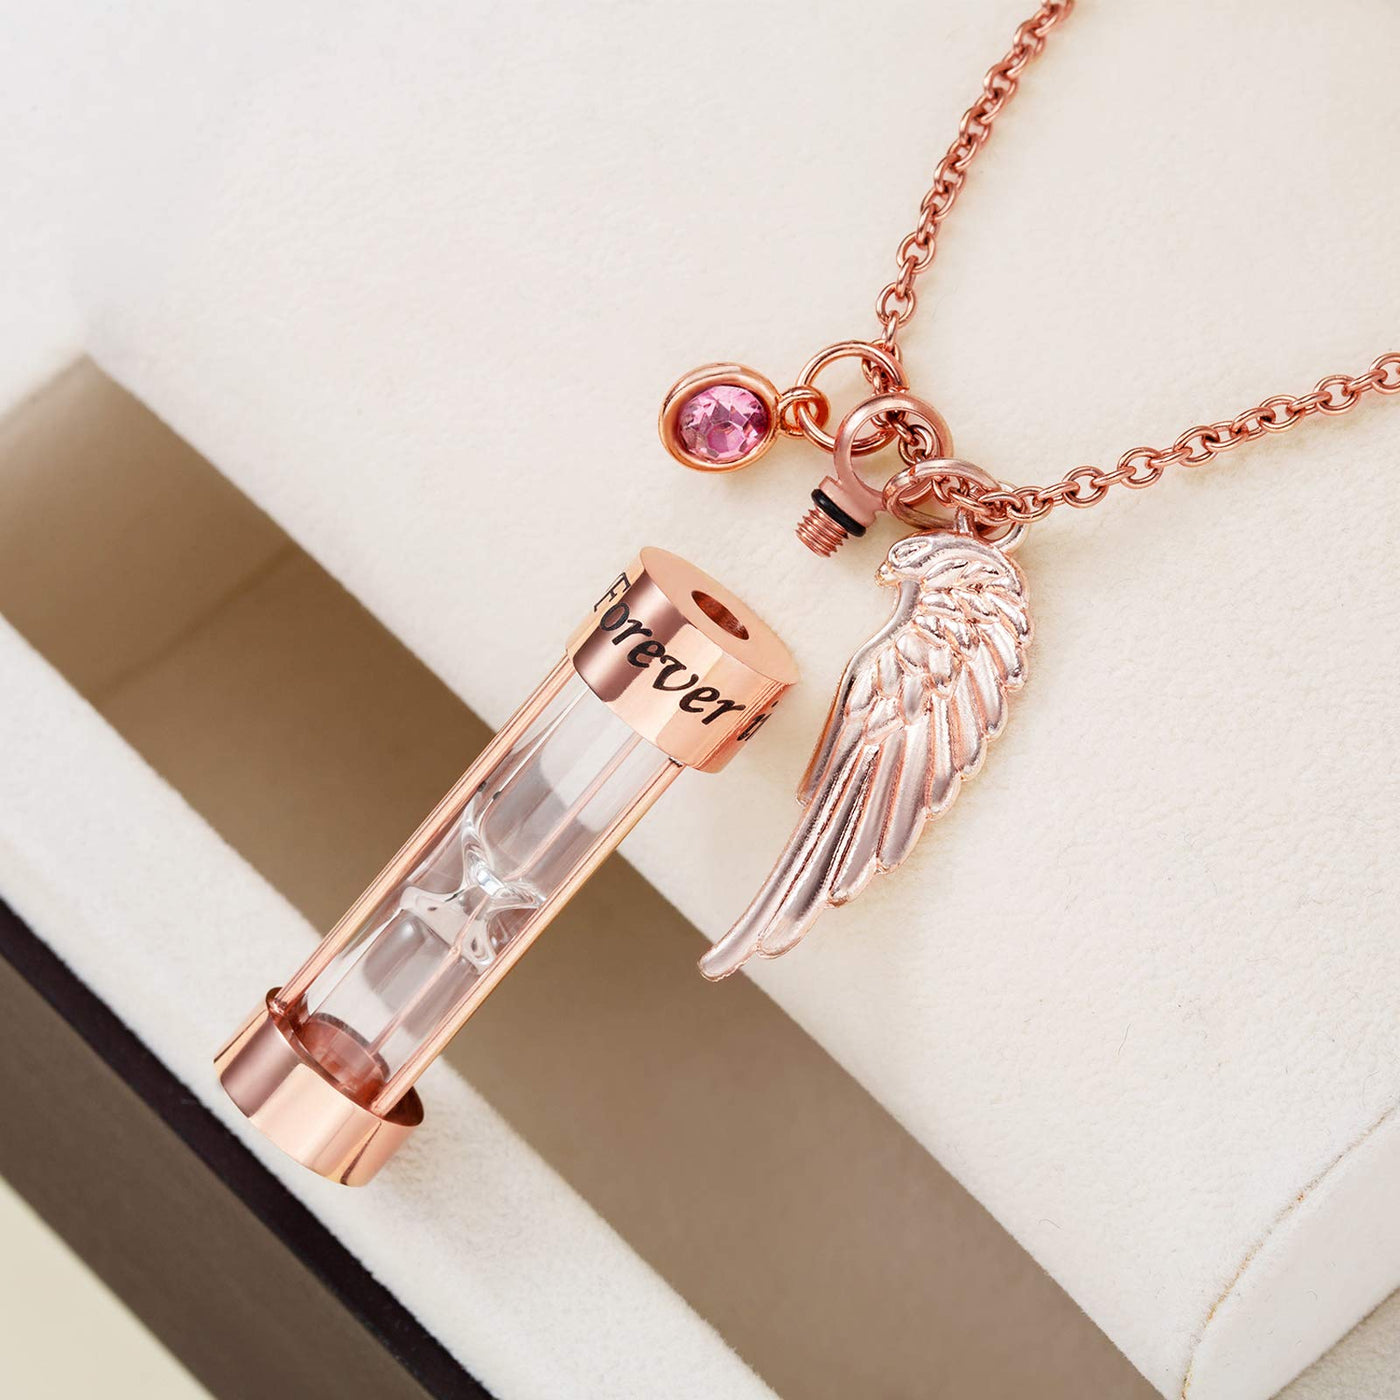 PREKIAR Cremation Urn Necklace for Ashes Timeless Hourglass Memorial  Pendant Keepsake Jewelry for Human Pet Ashes with 12 Birthstone Angel Wing  Rose Gold Hourglass